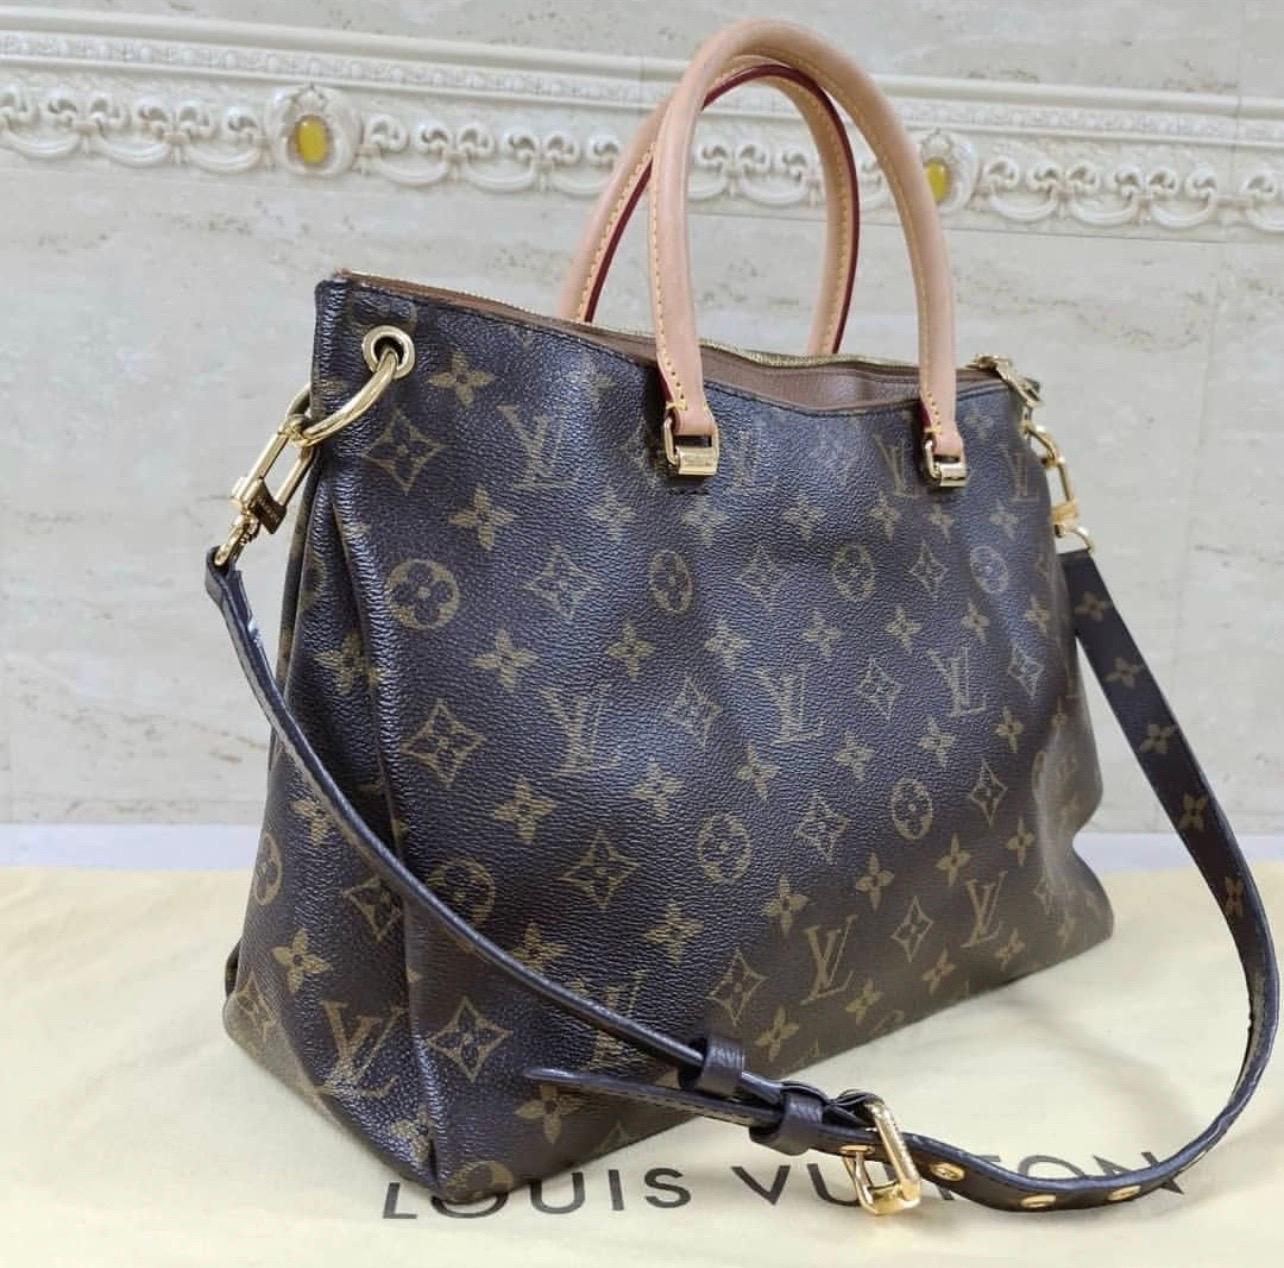 Louis Vuitton, the Pallas is a chic combination of Monogram canvas, natural cowhide leather trim, and colored calf leather. 

This tote is just as much functional as it is luxurious, with its classic natural cowhide leather Toron handles and a